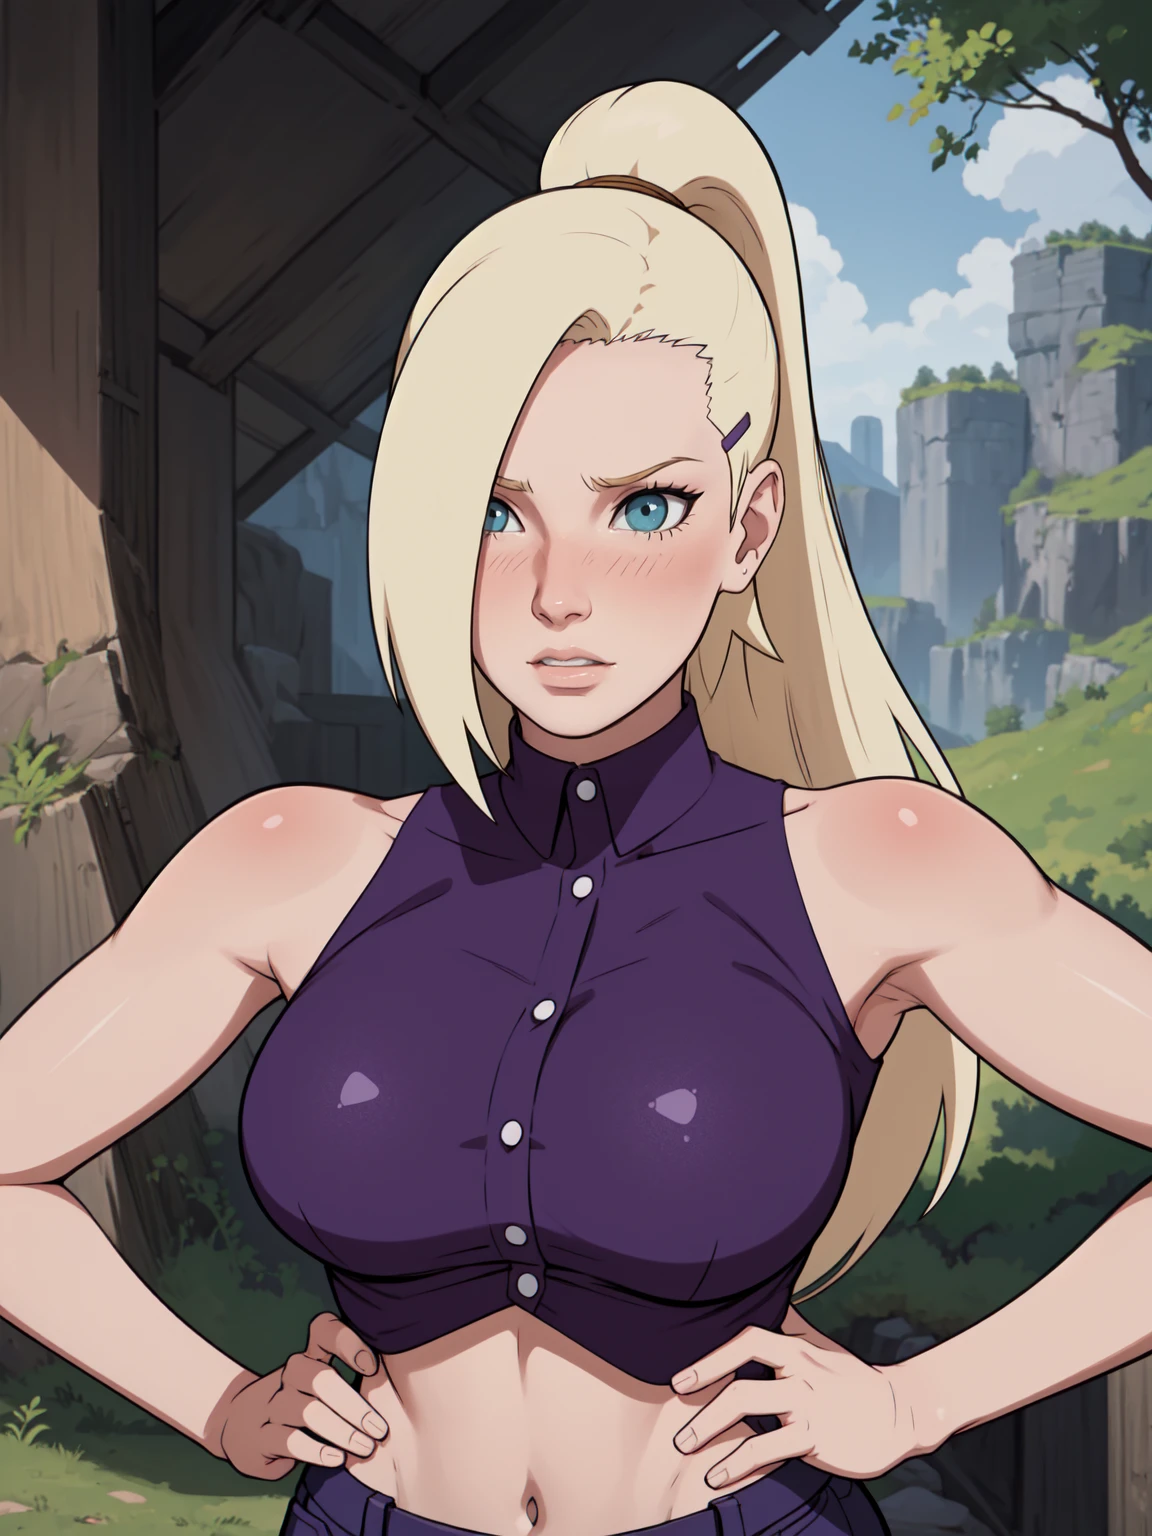 {-erro_de_anatomia:1.0} estilo anime, Masterpiece, absurdities, Yamanaka Ino\(Naruto\), 1girl Solo, woman, Perfect composition, Detailed lips, Beautiful face, body proportion, Blush, Long blonde hair, blue eyes, purple blouse, purple pant, Soft gauze, Super realistic, Detailed, photo shoot, Realistic faces and bodies, masterpiece, best quality, best illustration, hyper detailed, 1 woman, solo, glamorous, blushing, upper body, fighting, on nature, look at the view, dimanic poses, 